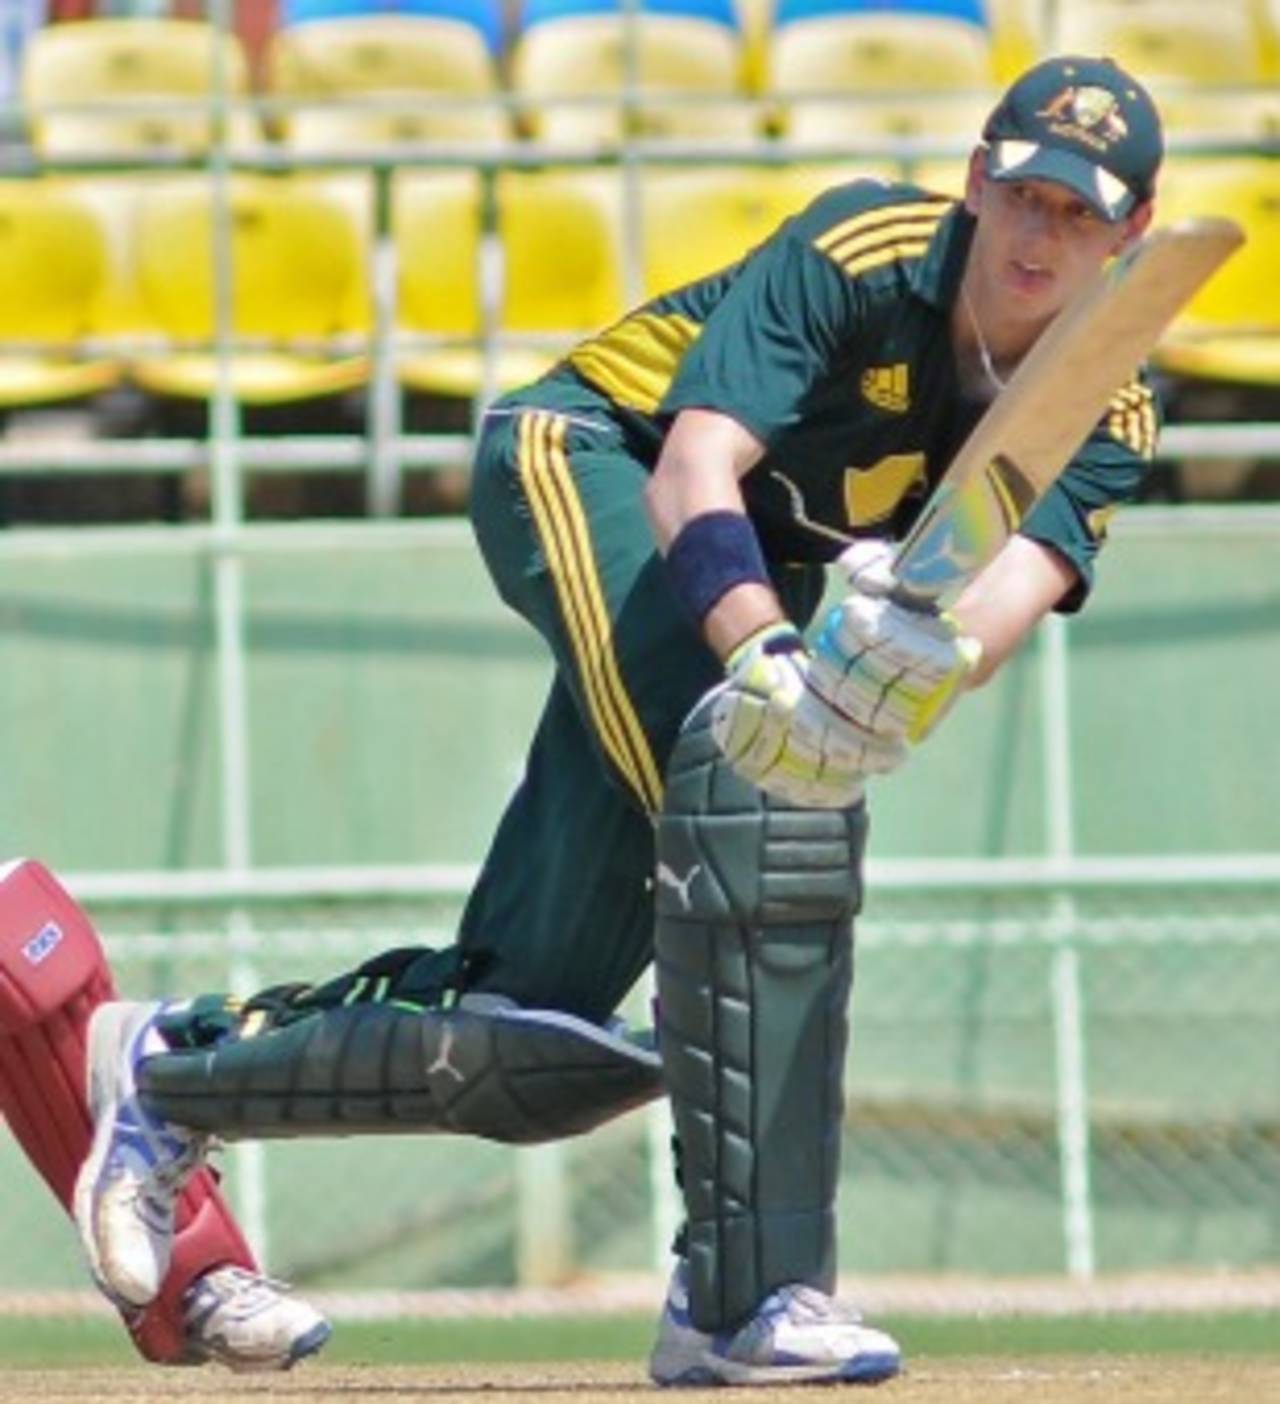 Kurtis Patterson is one of the most exciting prospects in the New South Wales squad&nbsp;&nbsp;&bull;&nbsp;&nbsp;ICC/Bhaskar Rao Kamana